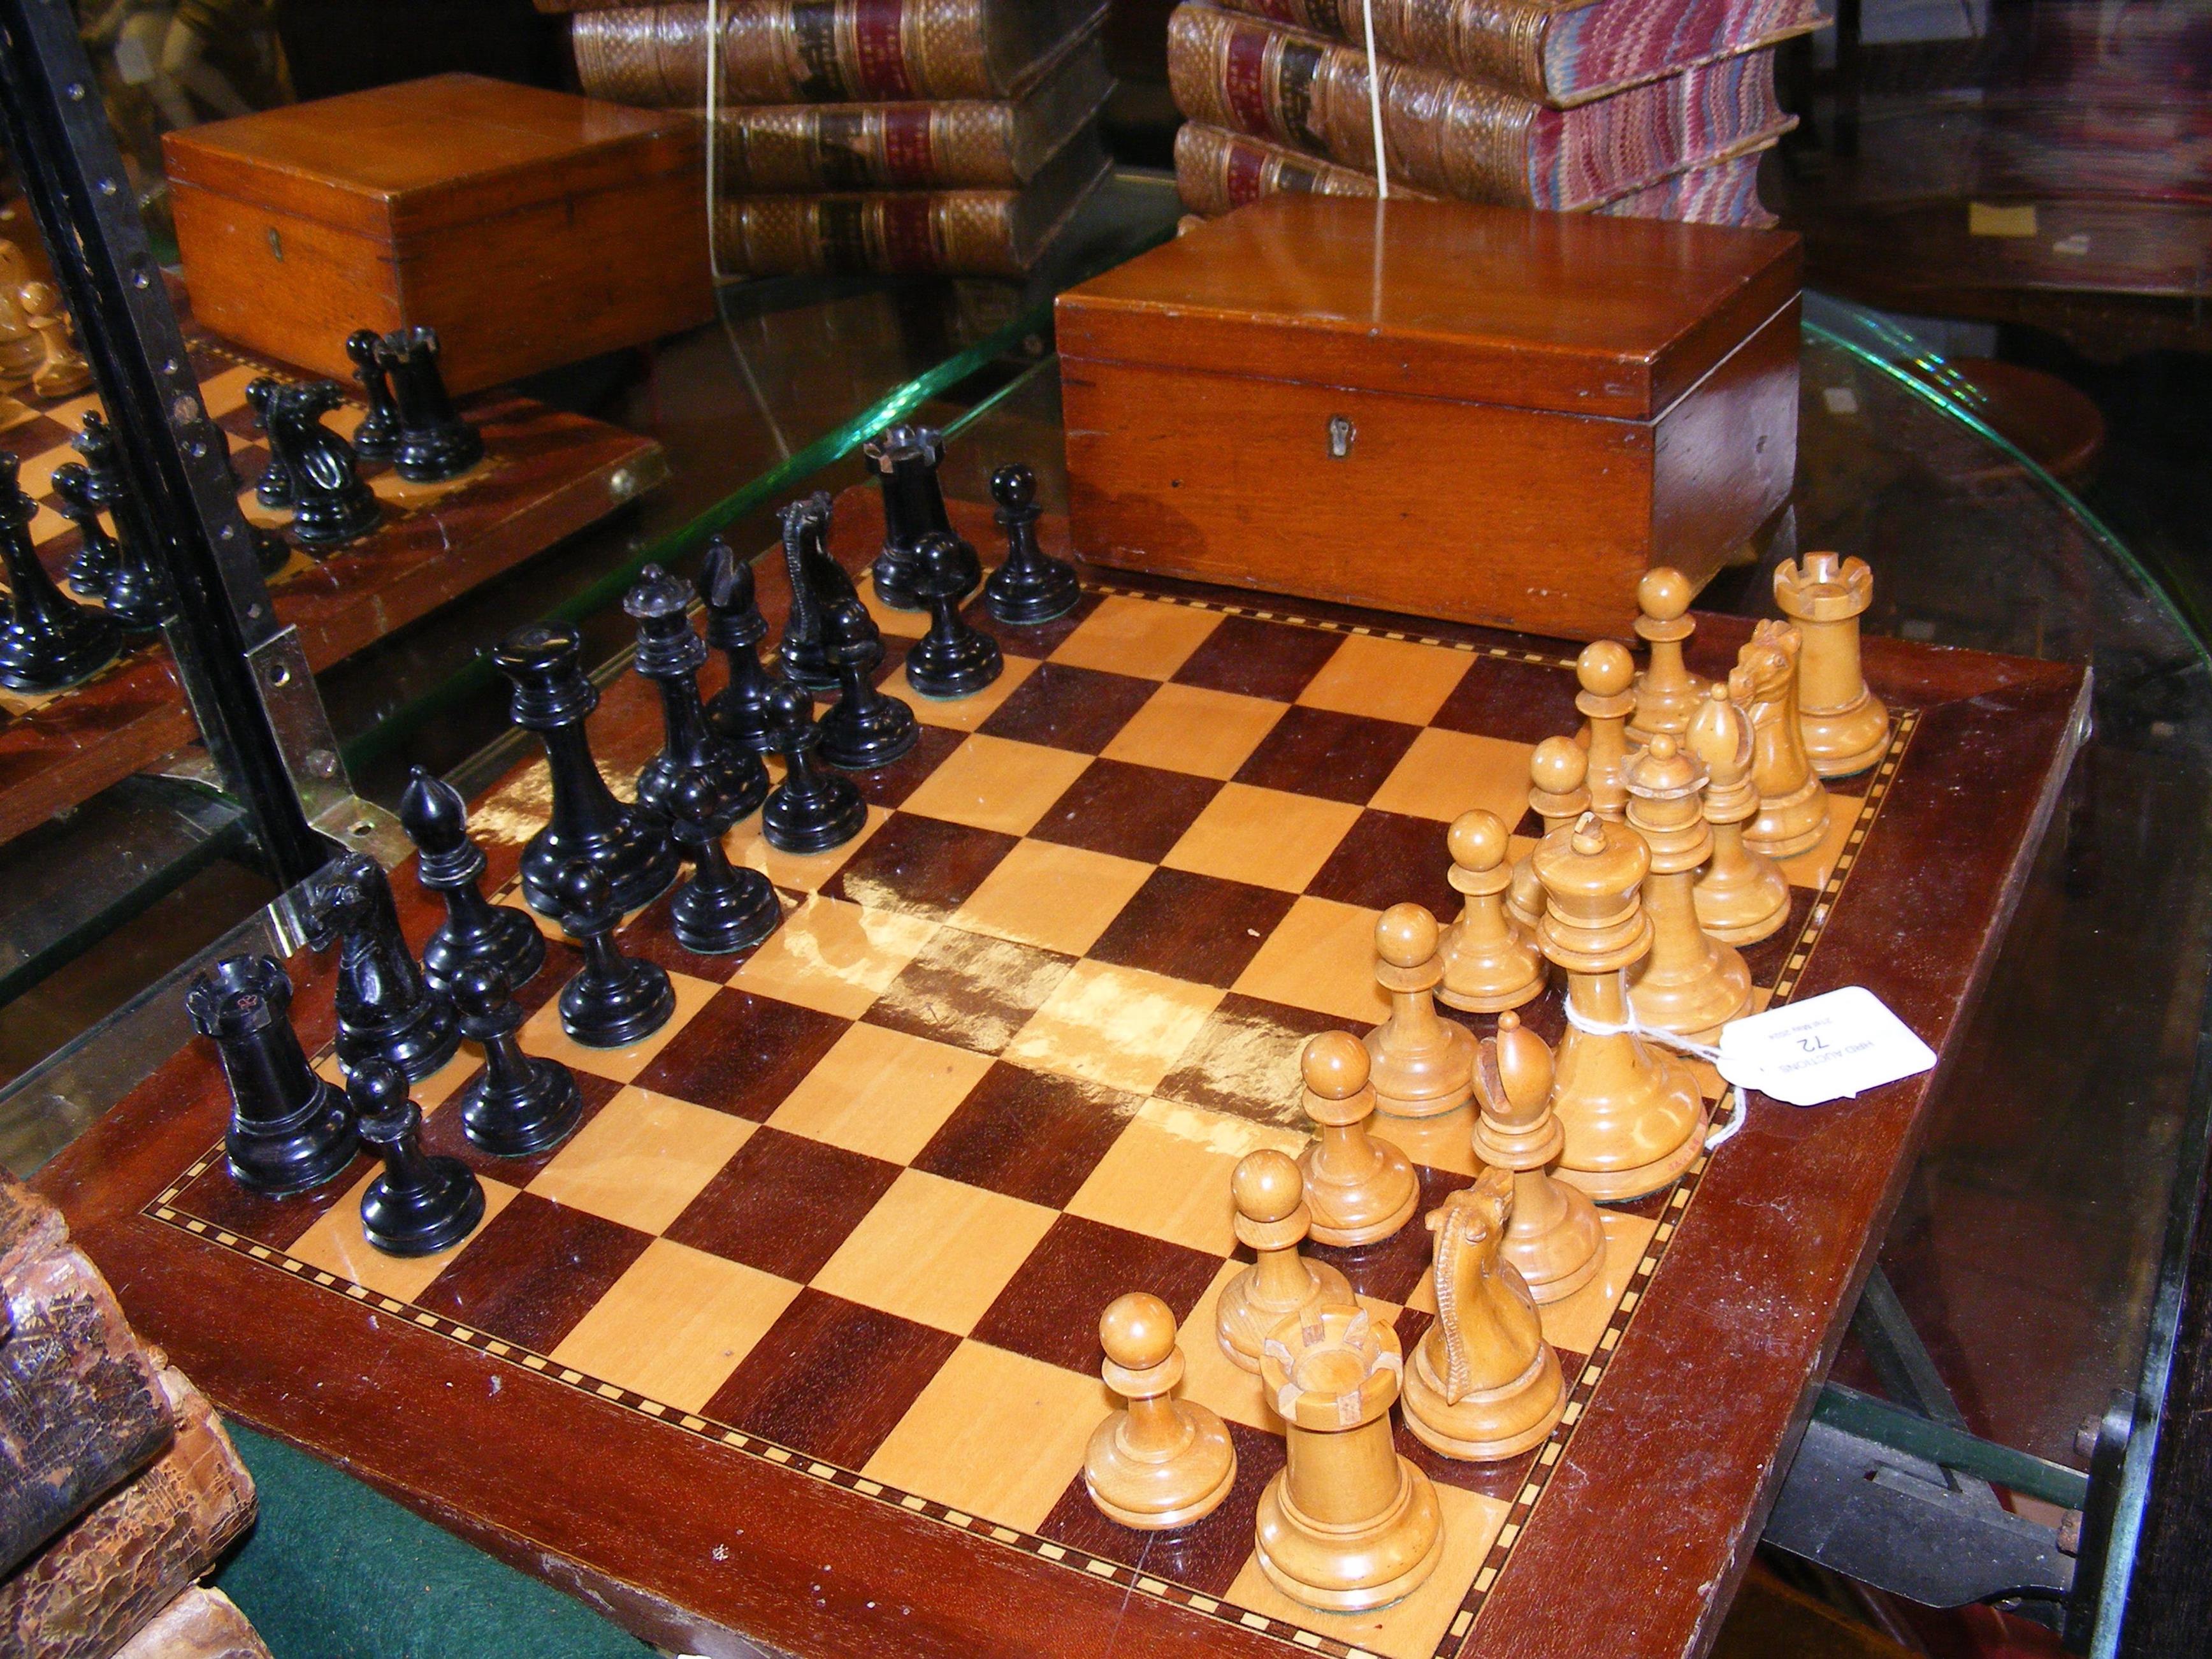 An antique chess set by Jaques of London - with or